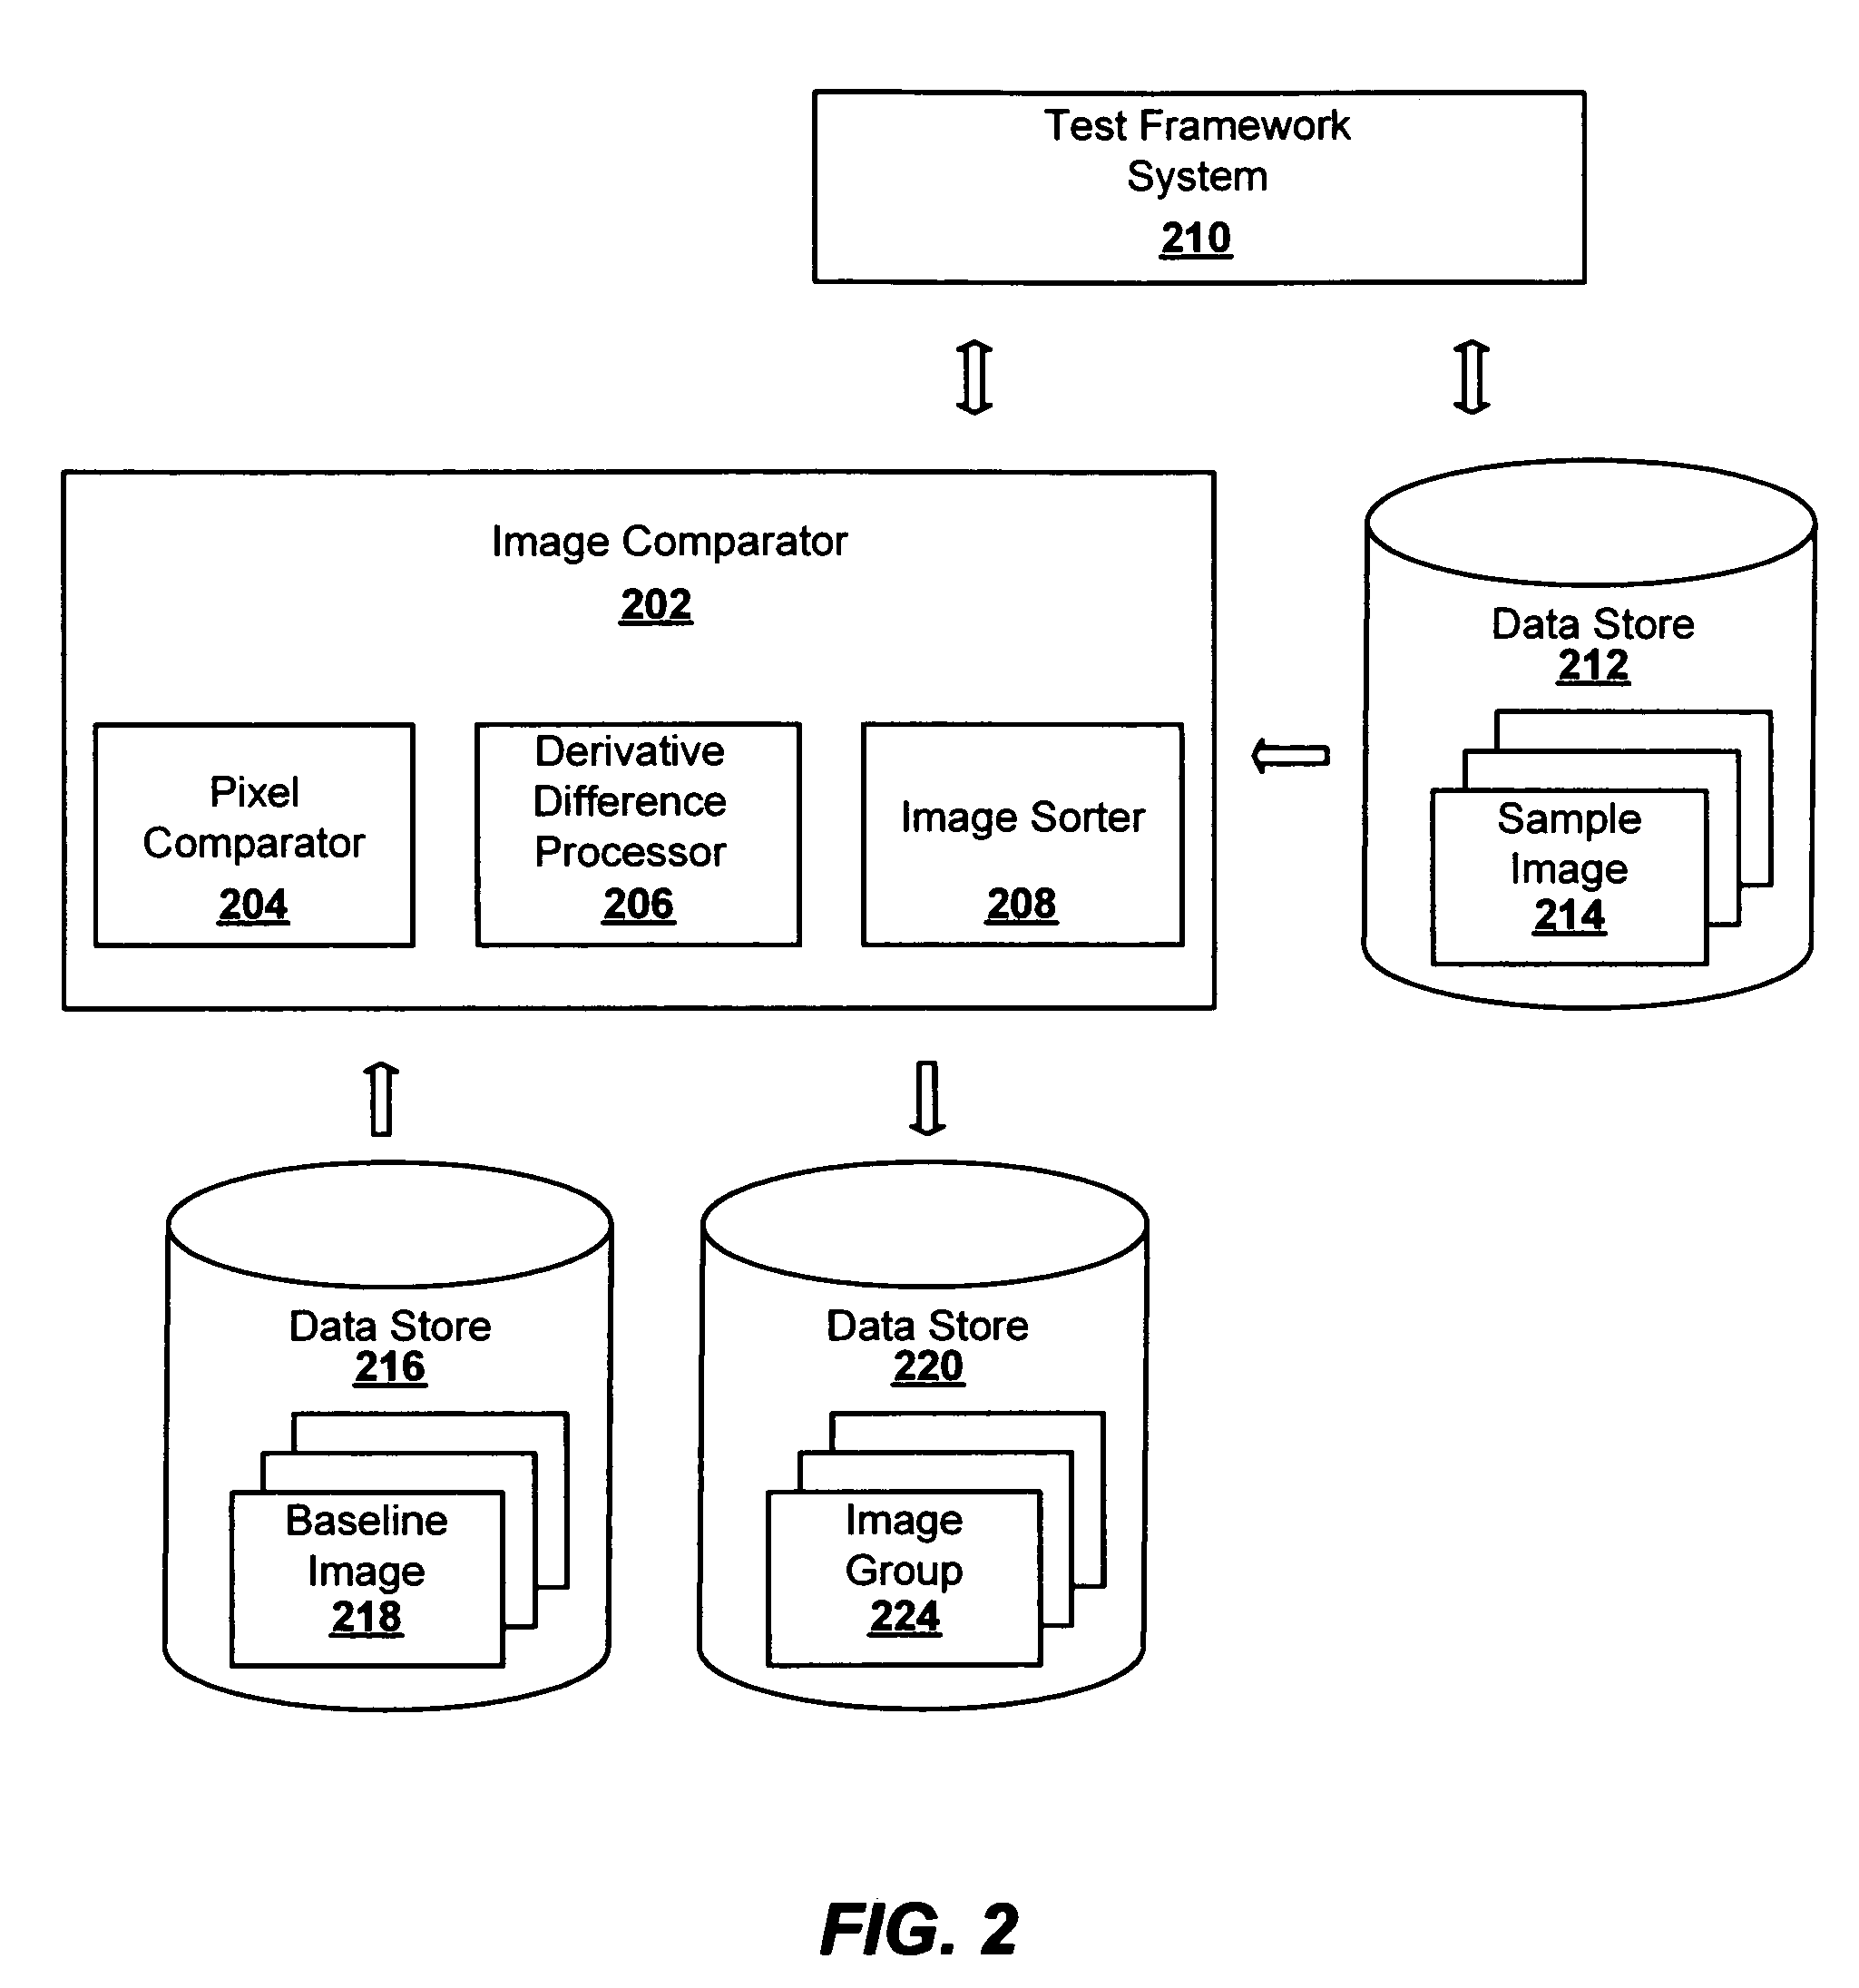 System and method for detecting similar differences in images